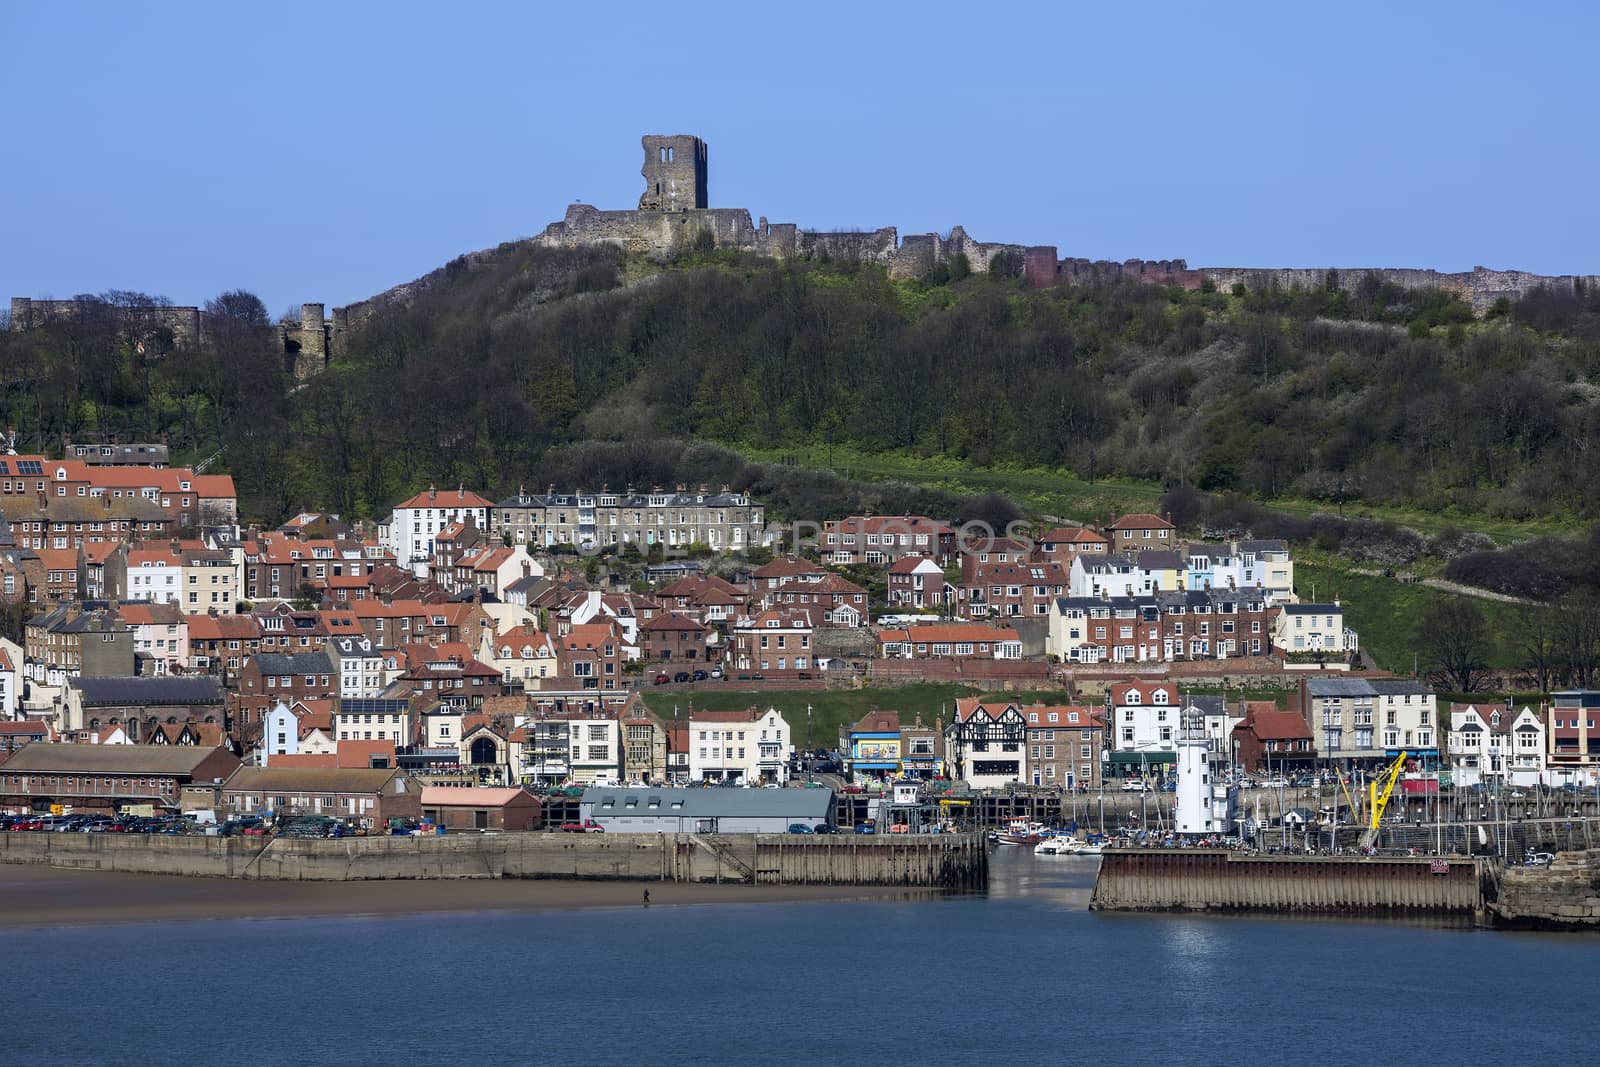 Scarborough Castle on a hillside above the town and harbor - North Yorkshire coast in the northeast of England.